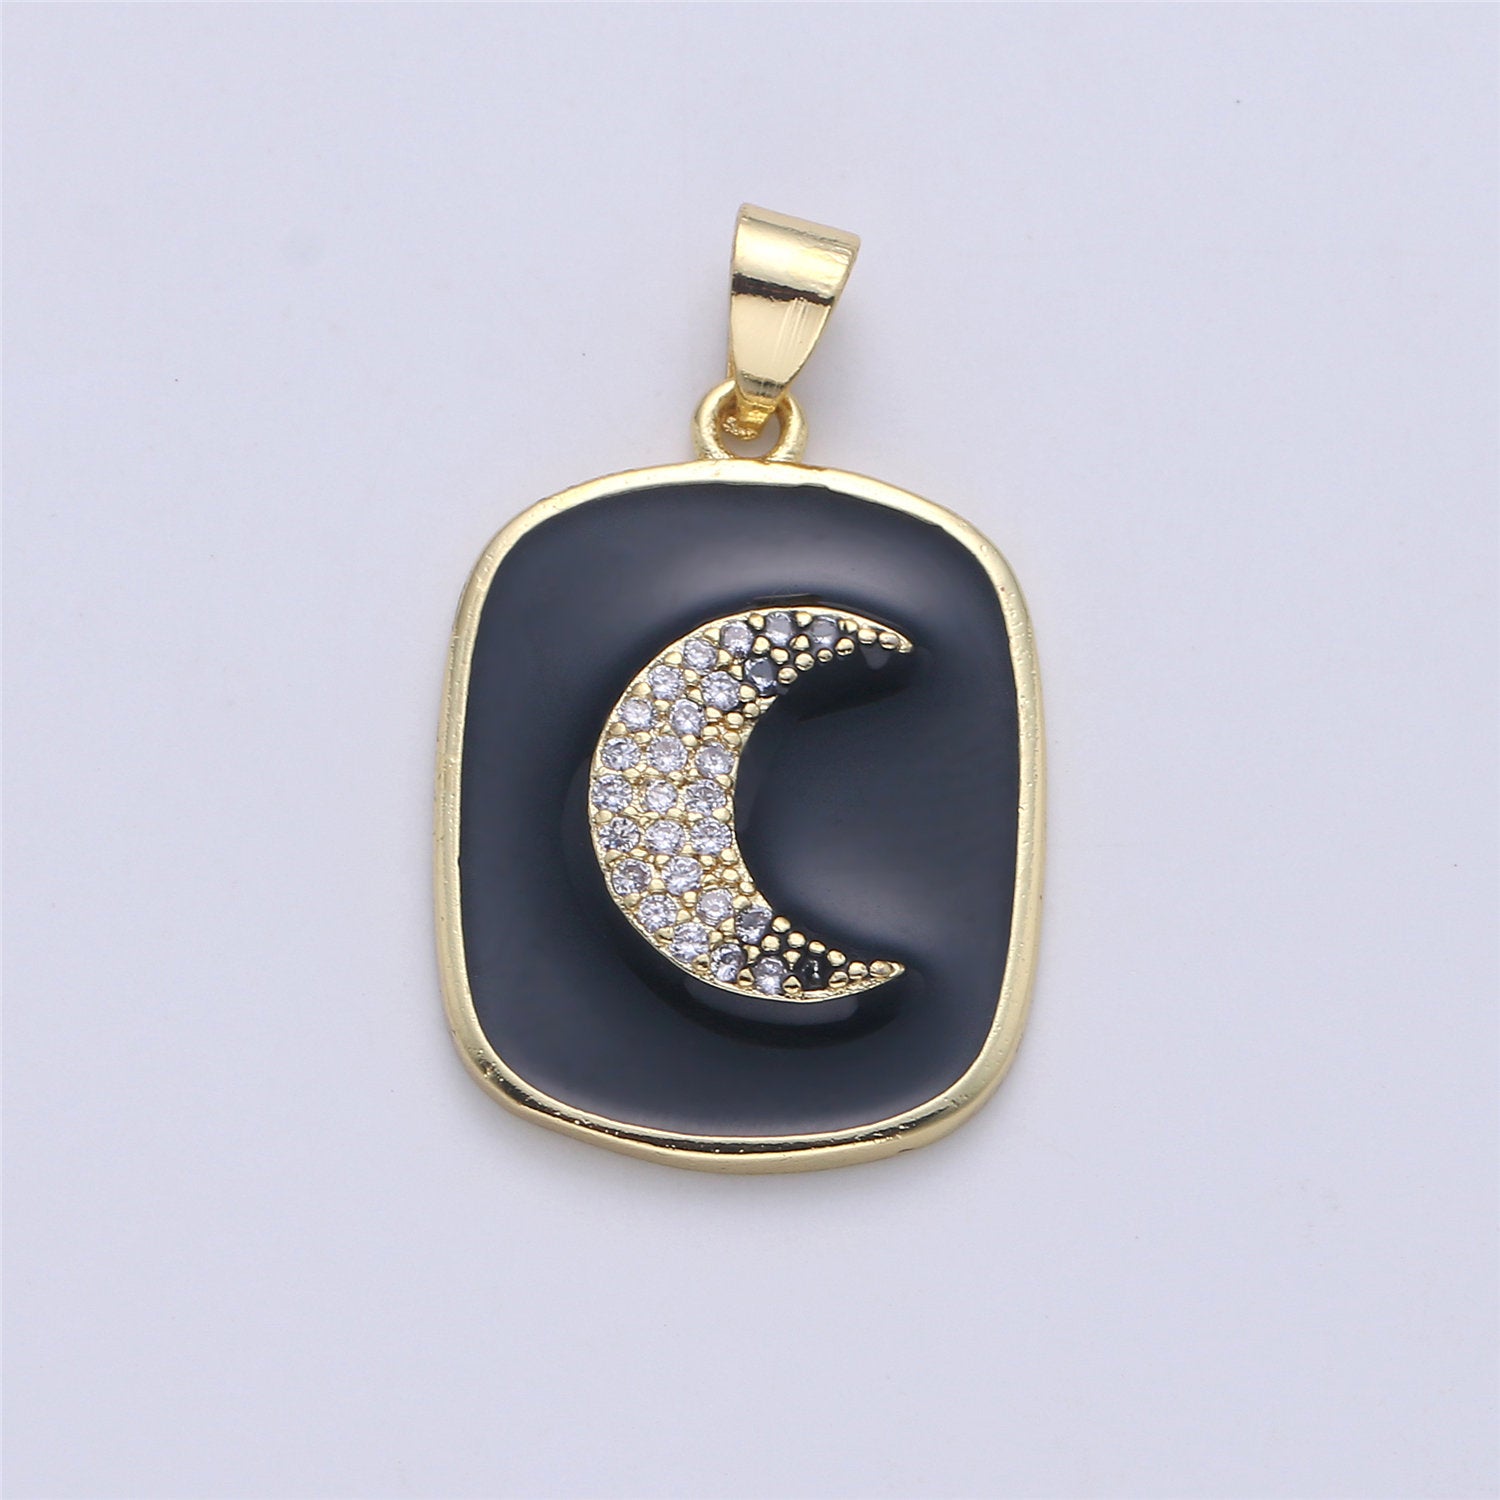 Gold Enamel Moon Charm Military Tag Pendant, Black White Celestial charm, Enamel Jewelry for Necklace Component - DLUXCA